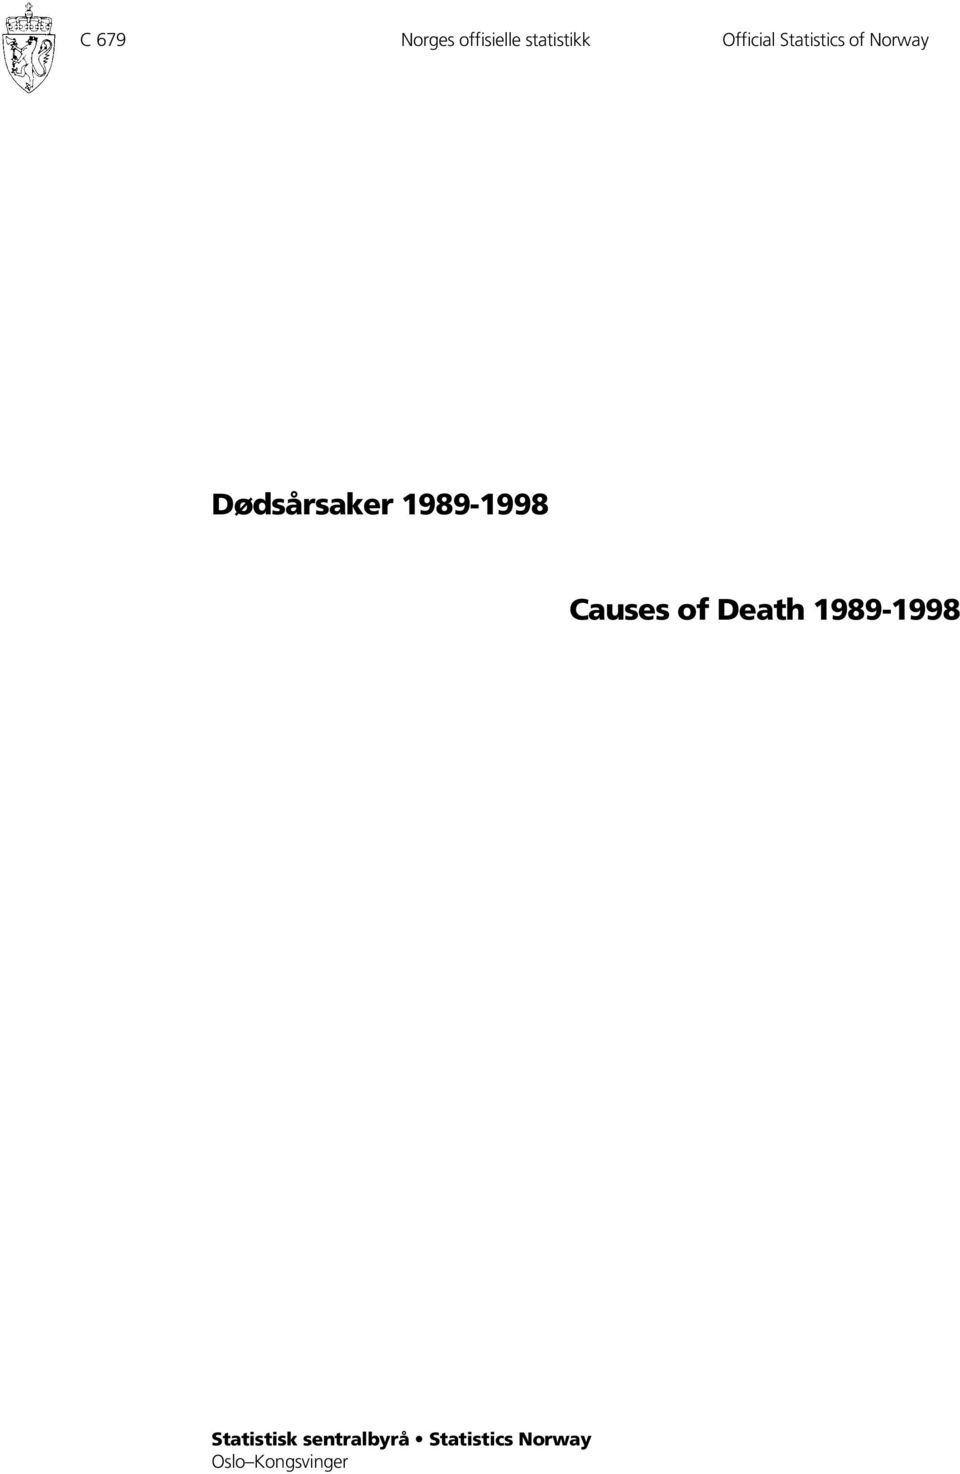 1989-1998 Causes of Death 1989-1998